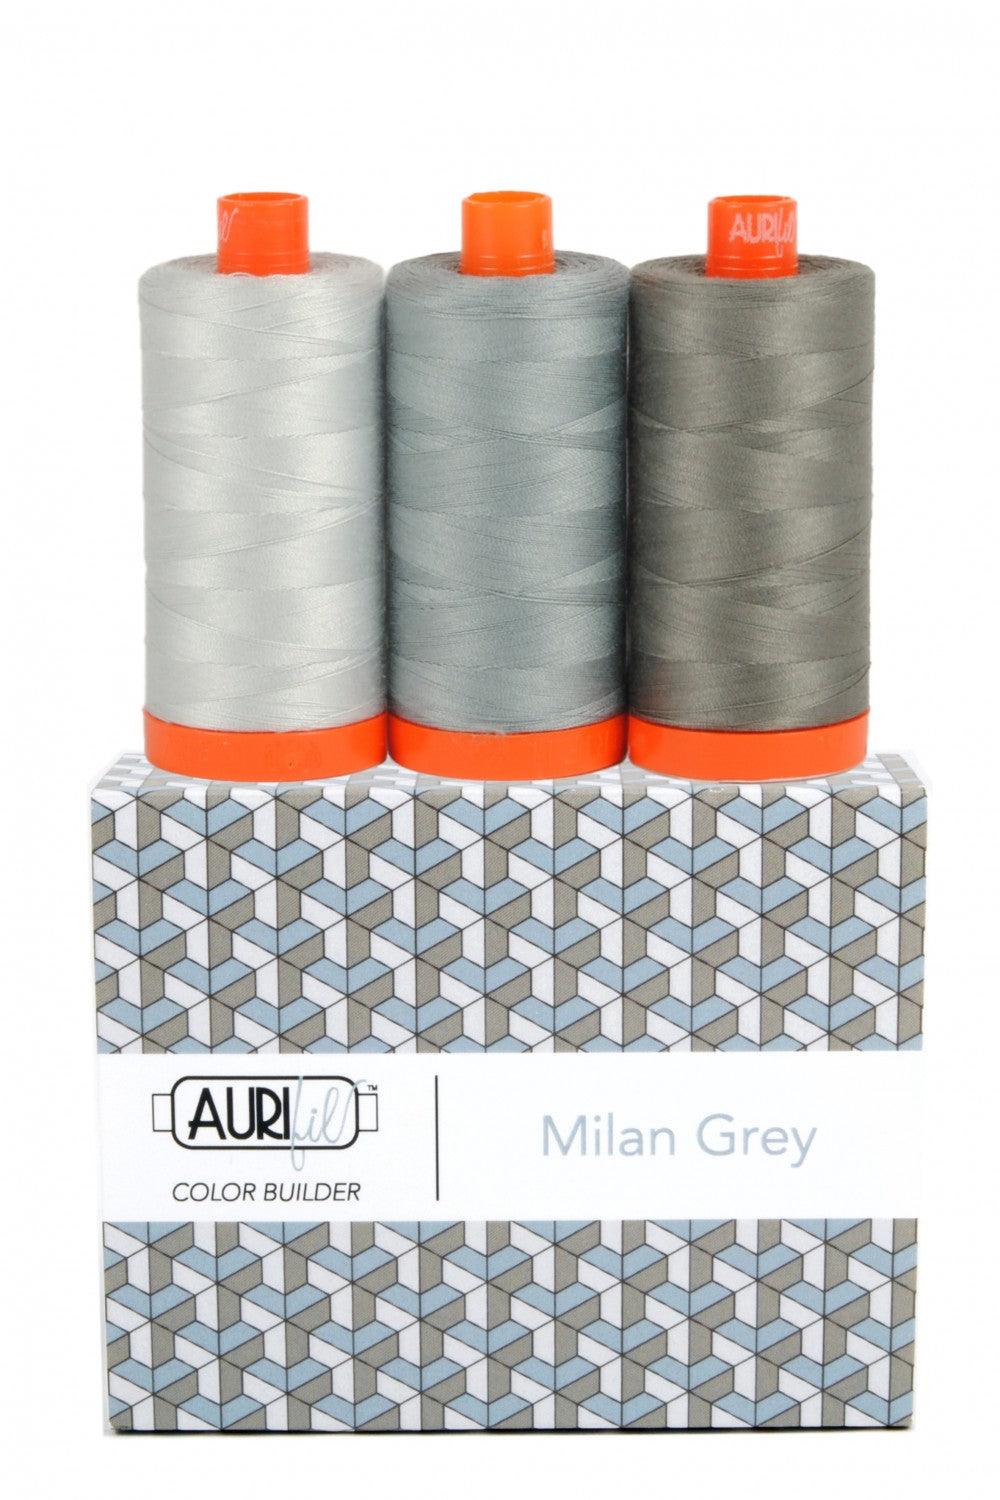 Milan Grey, Color Builder, Aurifil, 1300m, Package of 3 - Kawartha Quilting and Sewing LTD.